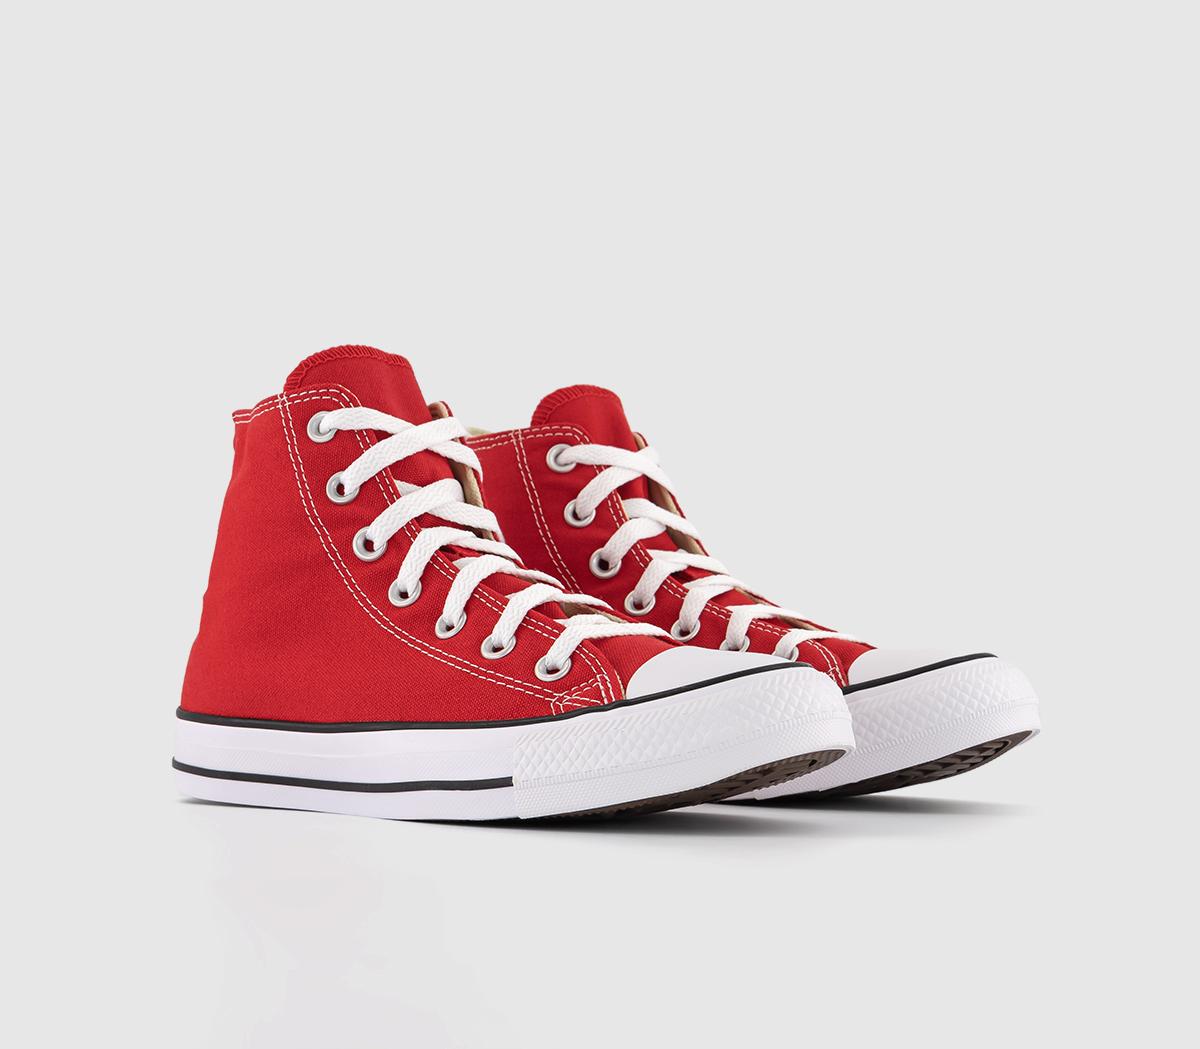 Converse Kids All Star High Top Red, White And Blue Canvas Printed Trainers, 4.5